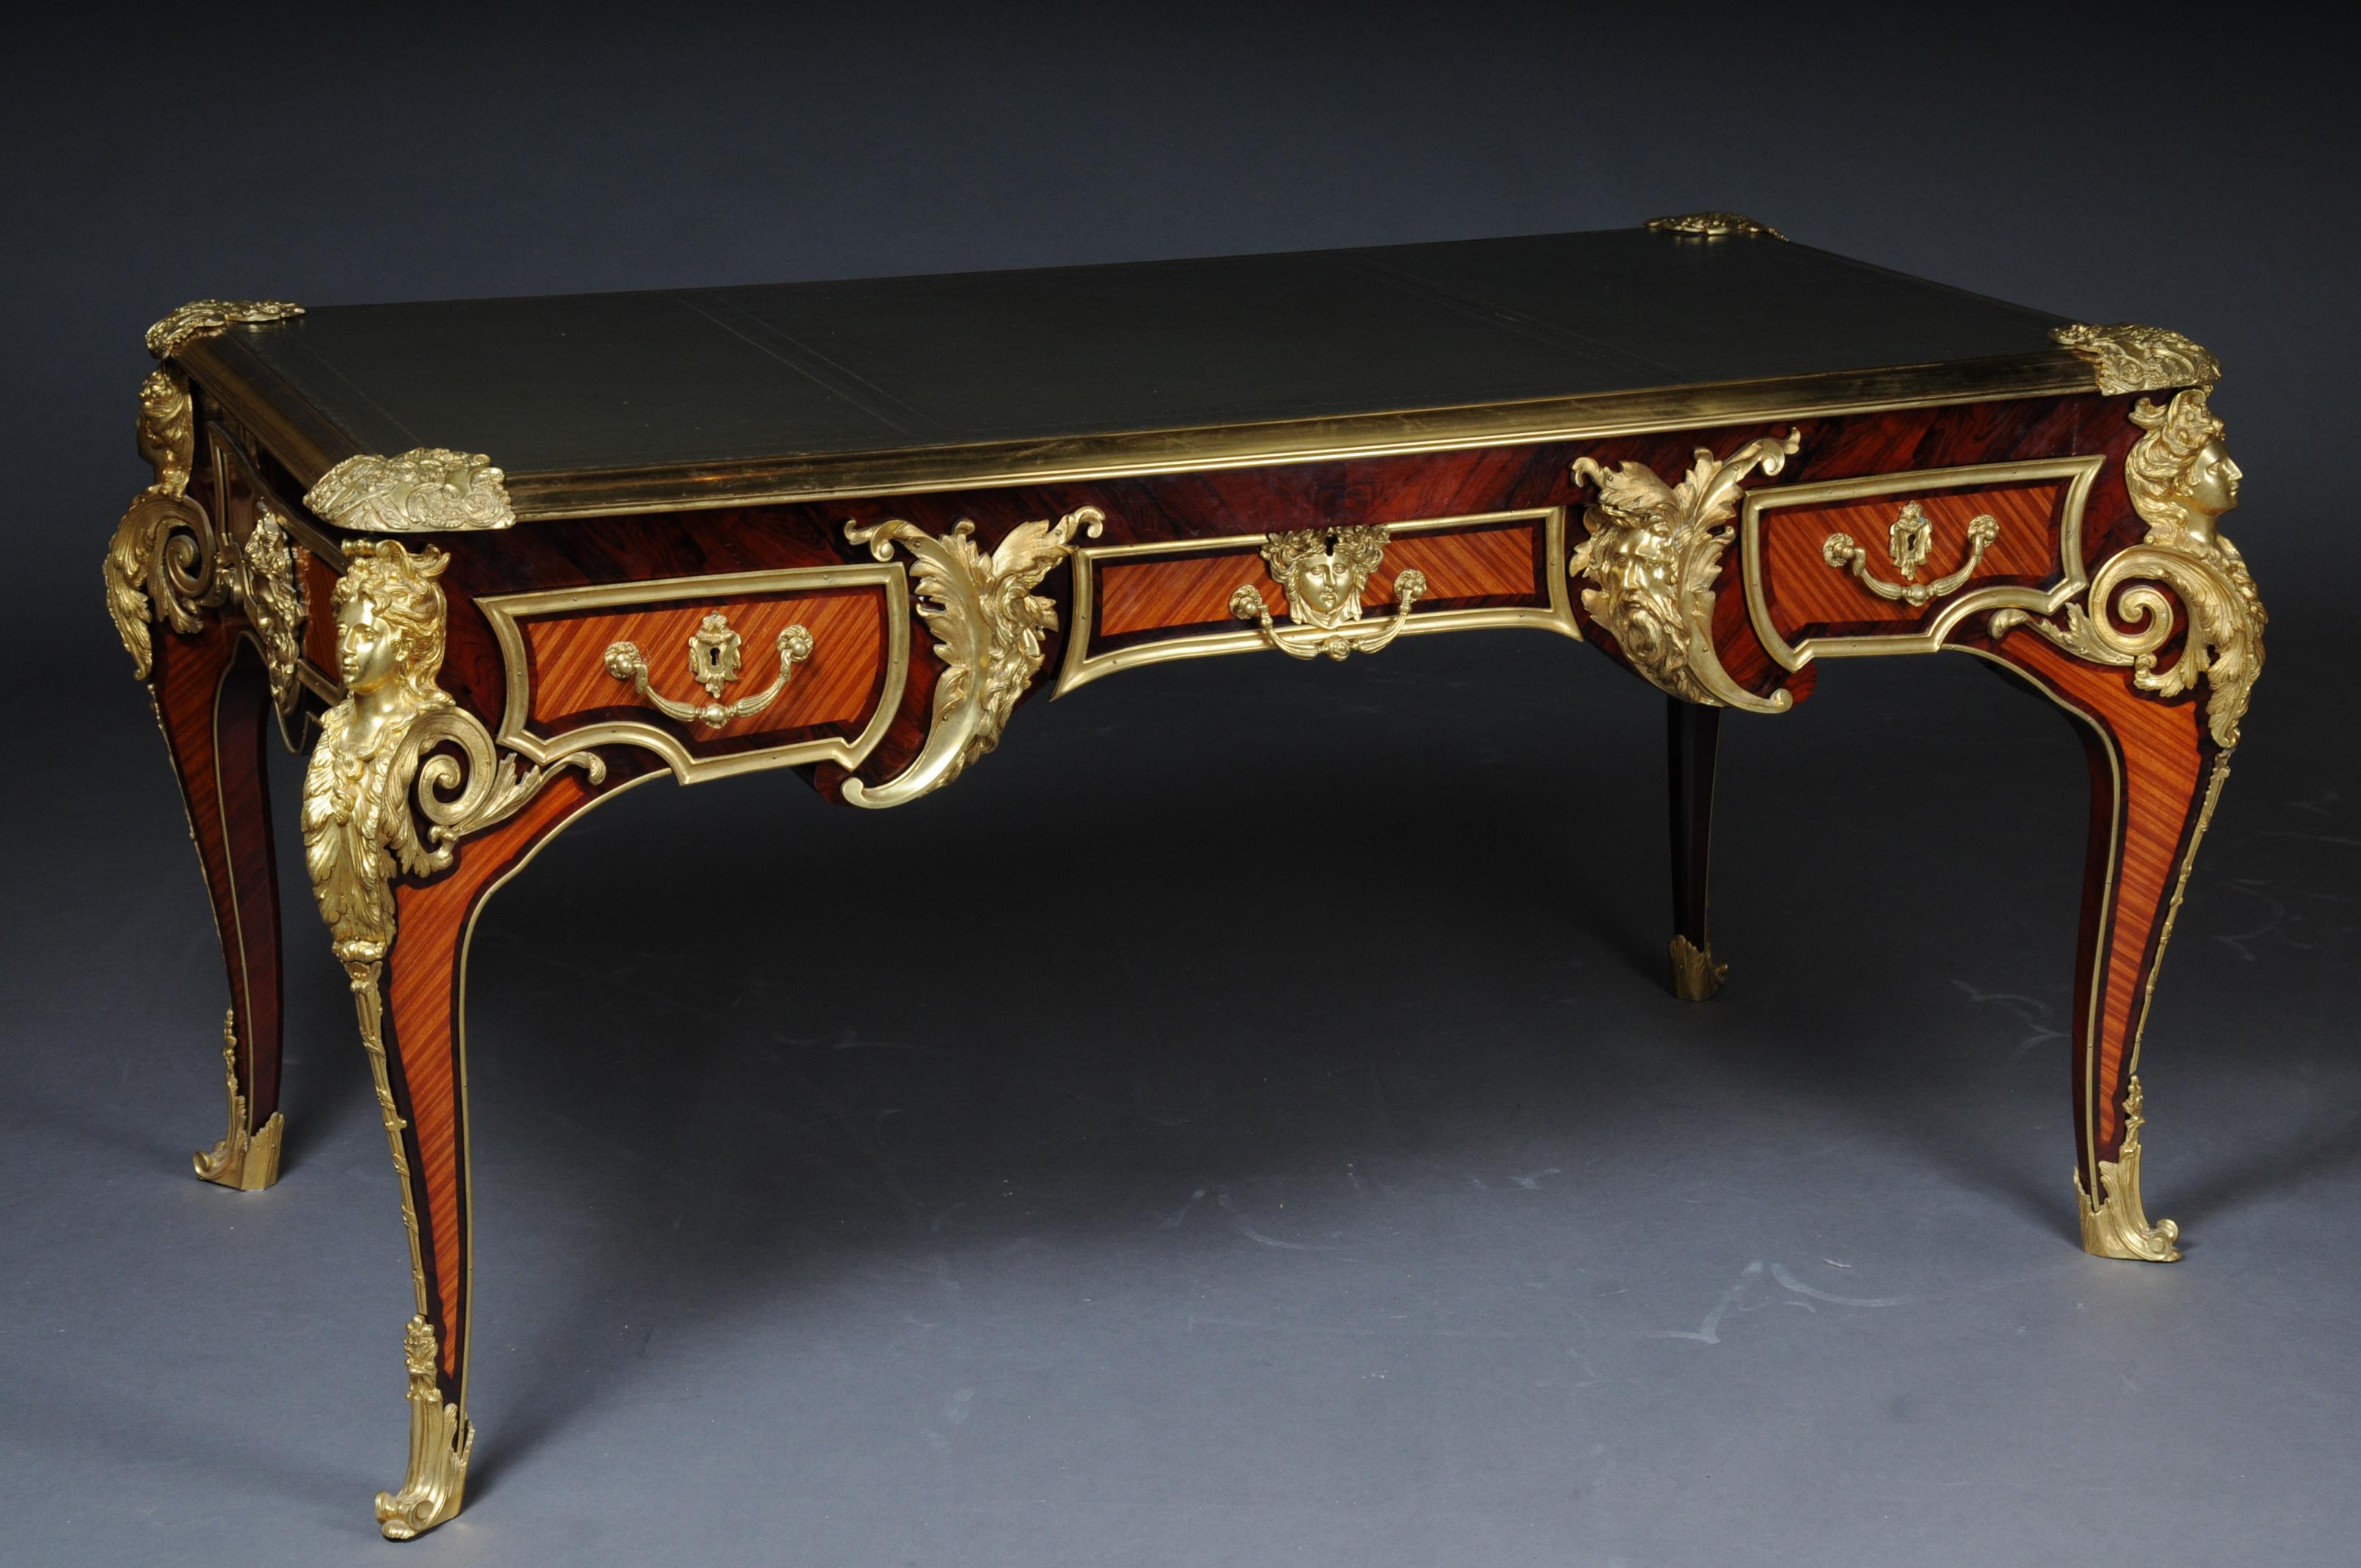 Imperial French bureau plat or desk by Charles Boulle

This model was built by the most important and history-writing court carpenter Louis IV, Charles Boulle.
Polished tulip veneer on solid beech and oakwood. Extremely finely chiseled bronze.